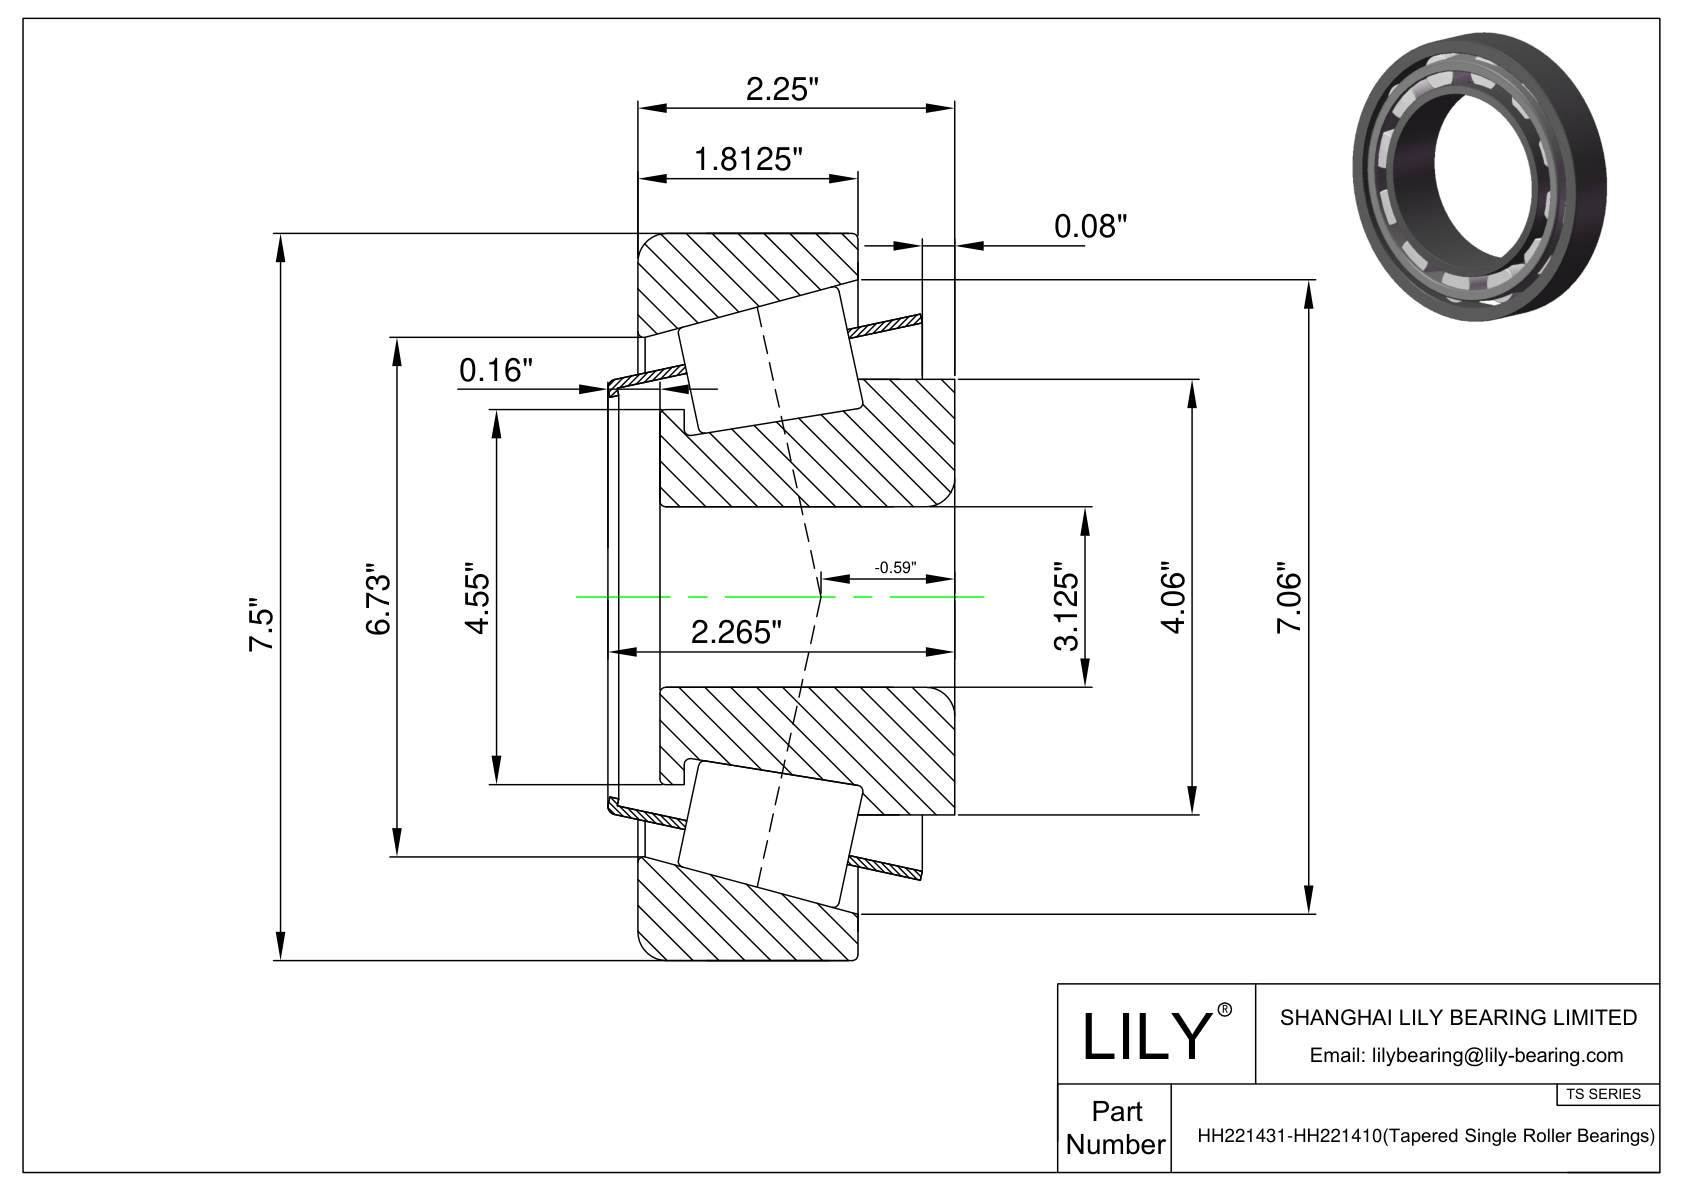 HH221431-HH221410 TS (Tapered Single Roller Bearings) (Imperial) cad drawing